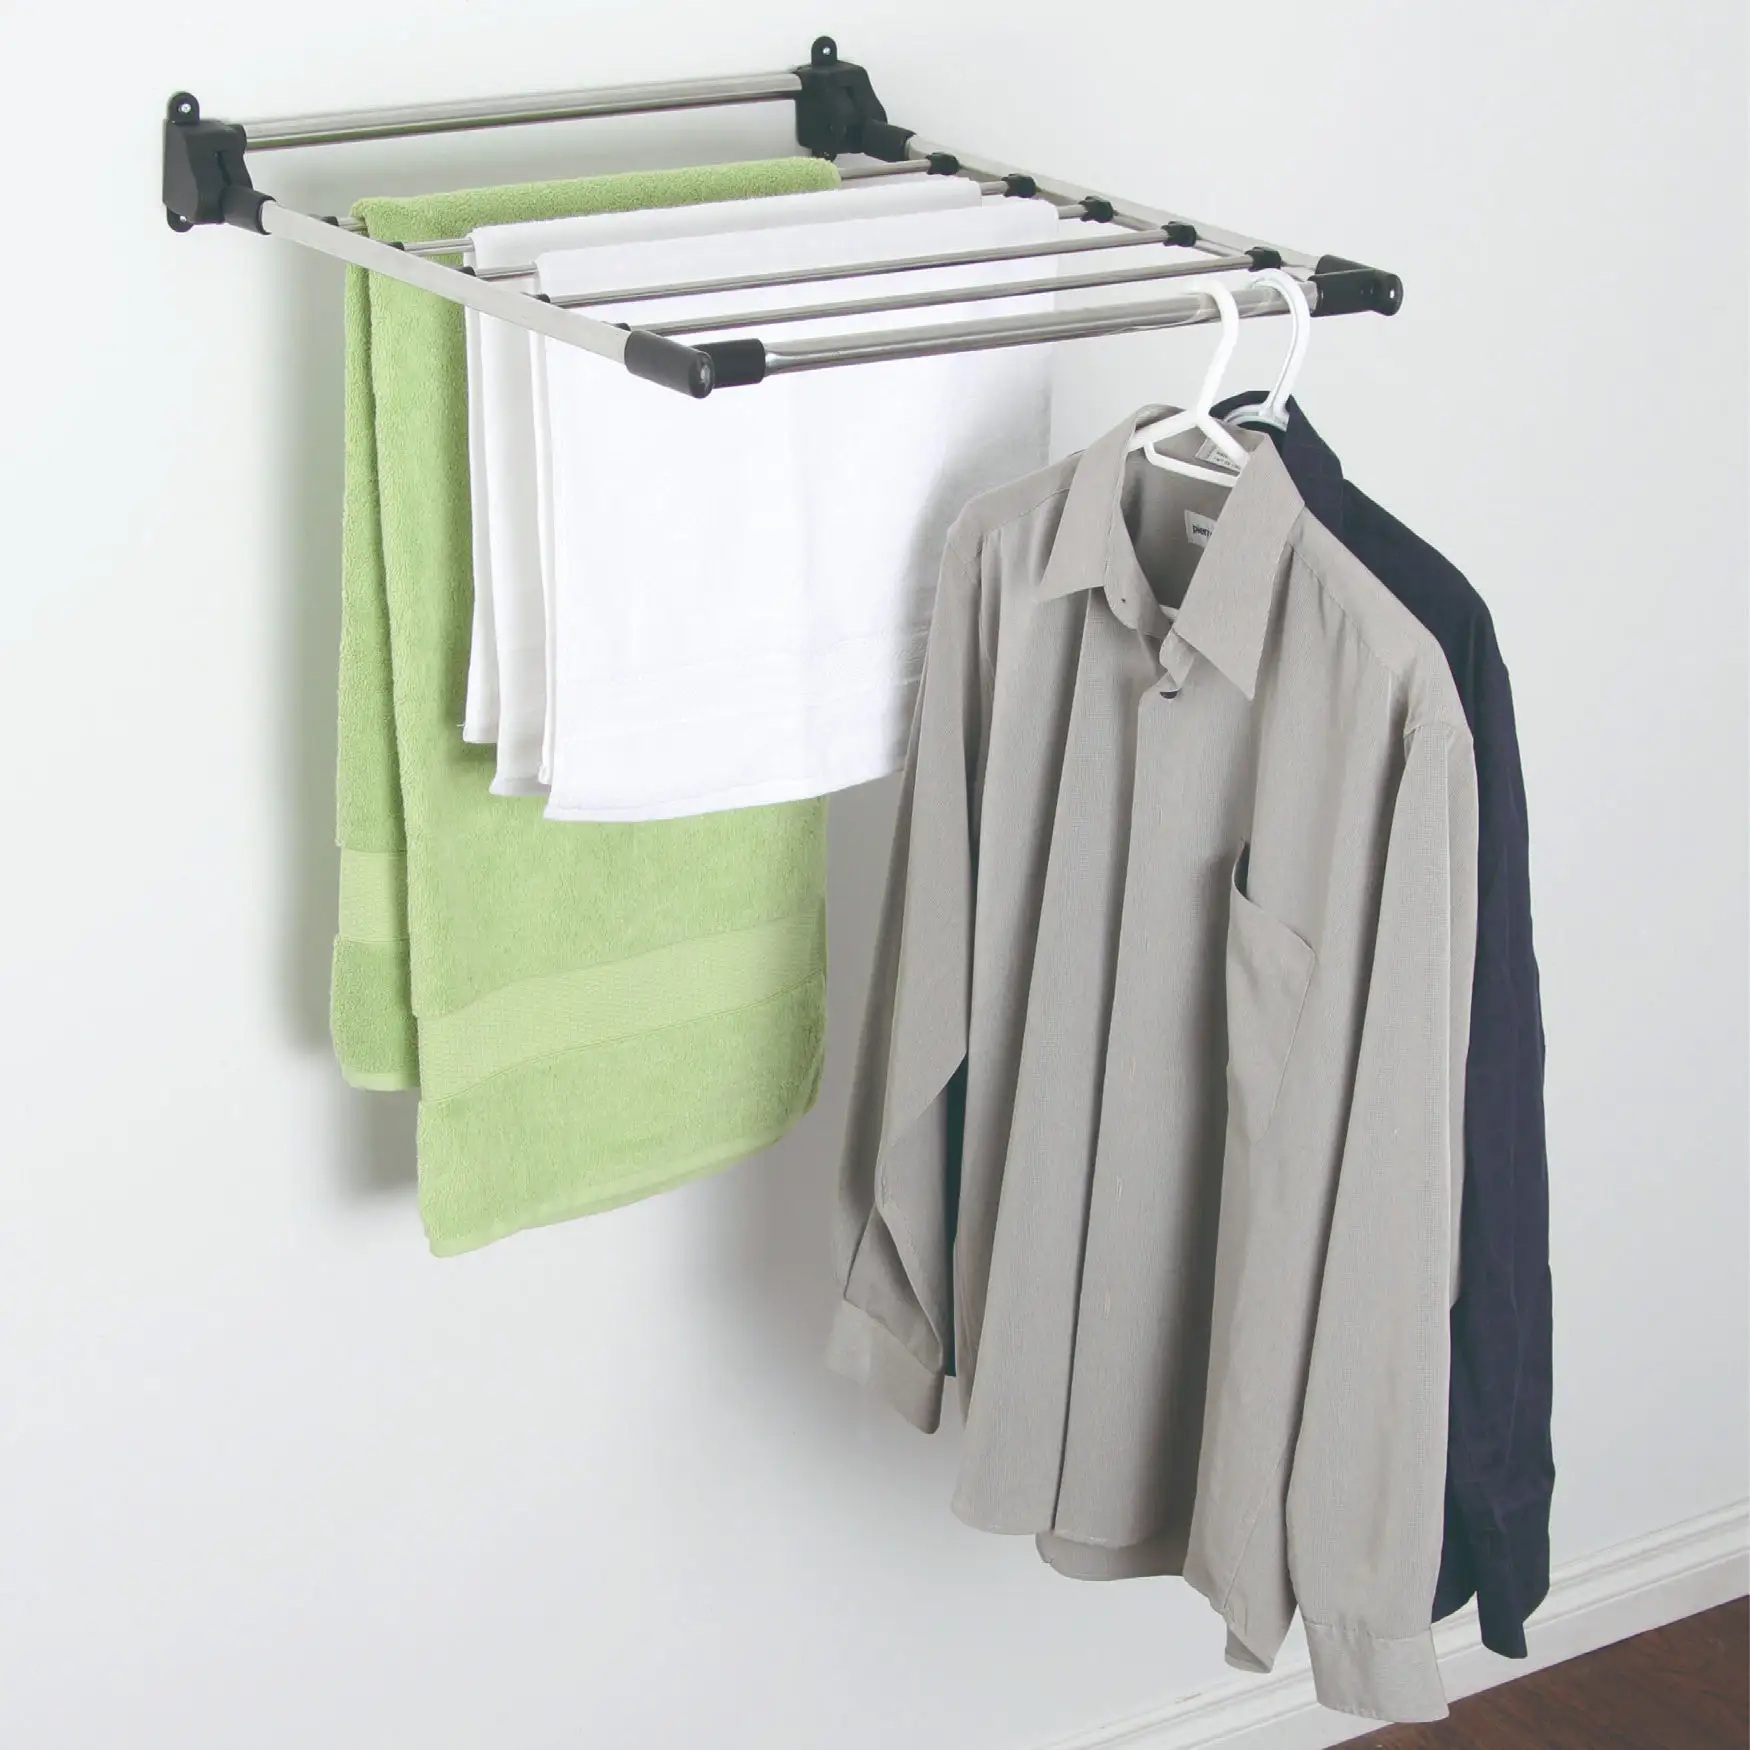 Foldable Extend Drying Laundry Rack Towel Or Clothes Hanging Wall Mounted Fixed Folding Drying Rack